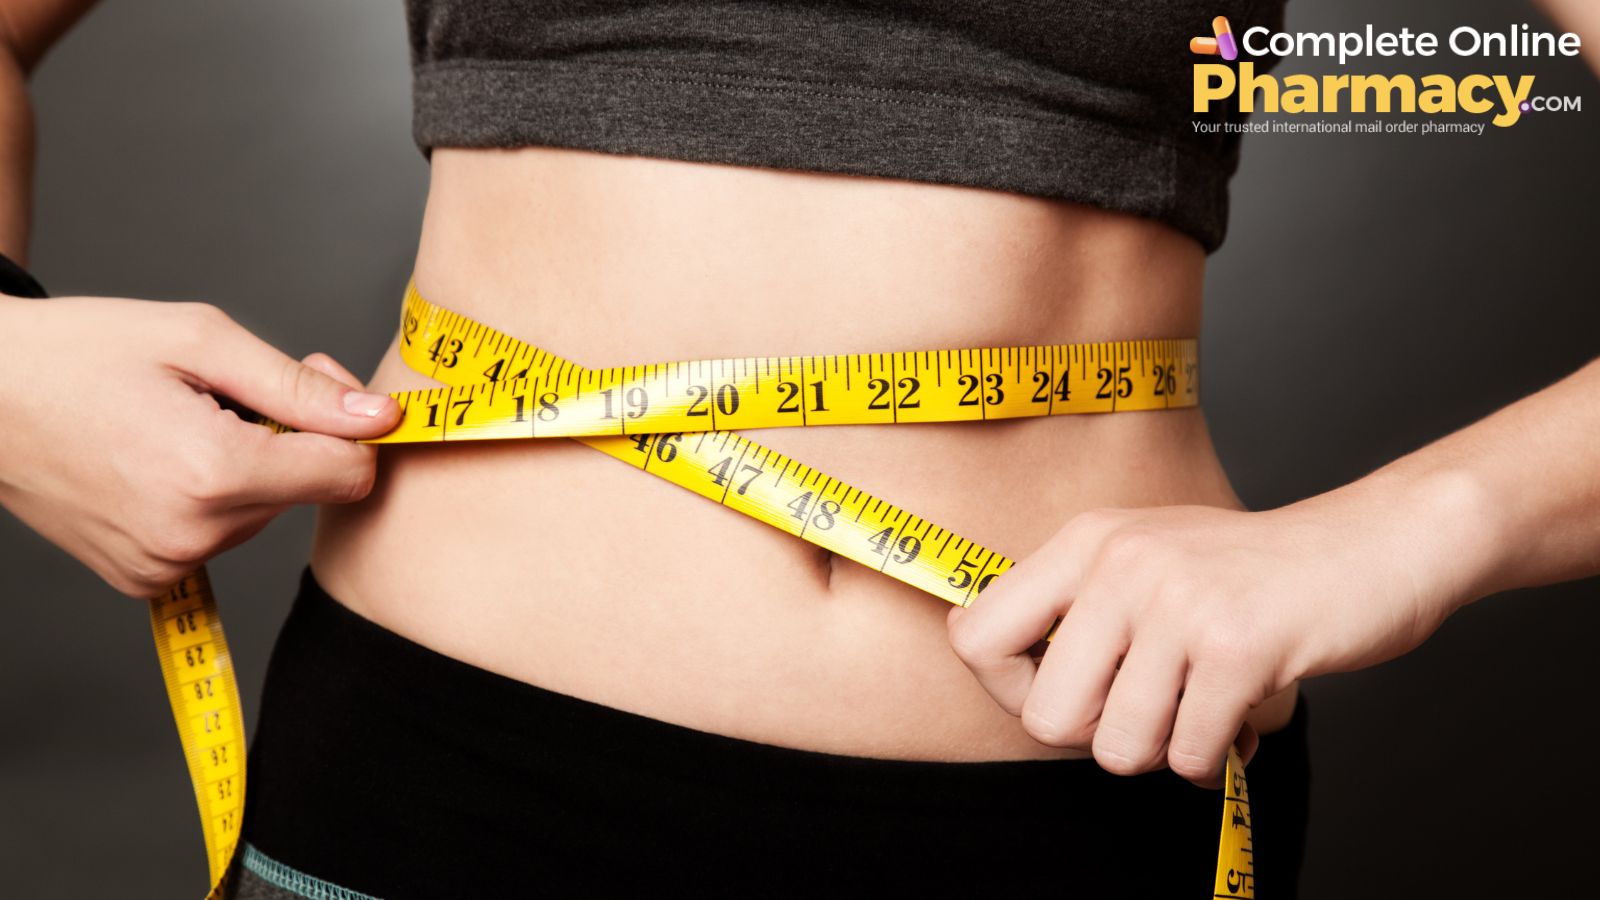 How do HCG injections work for your weight loss diet?